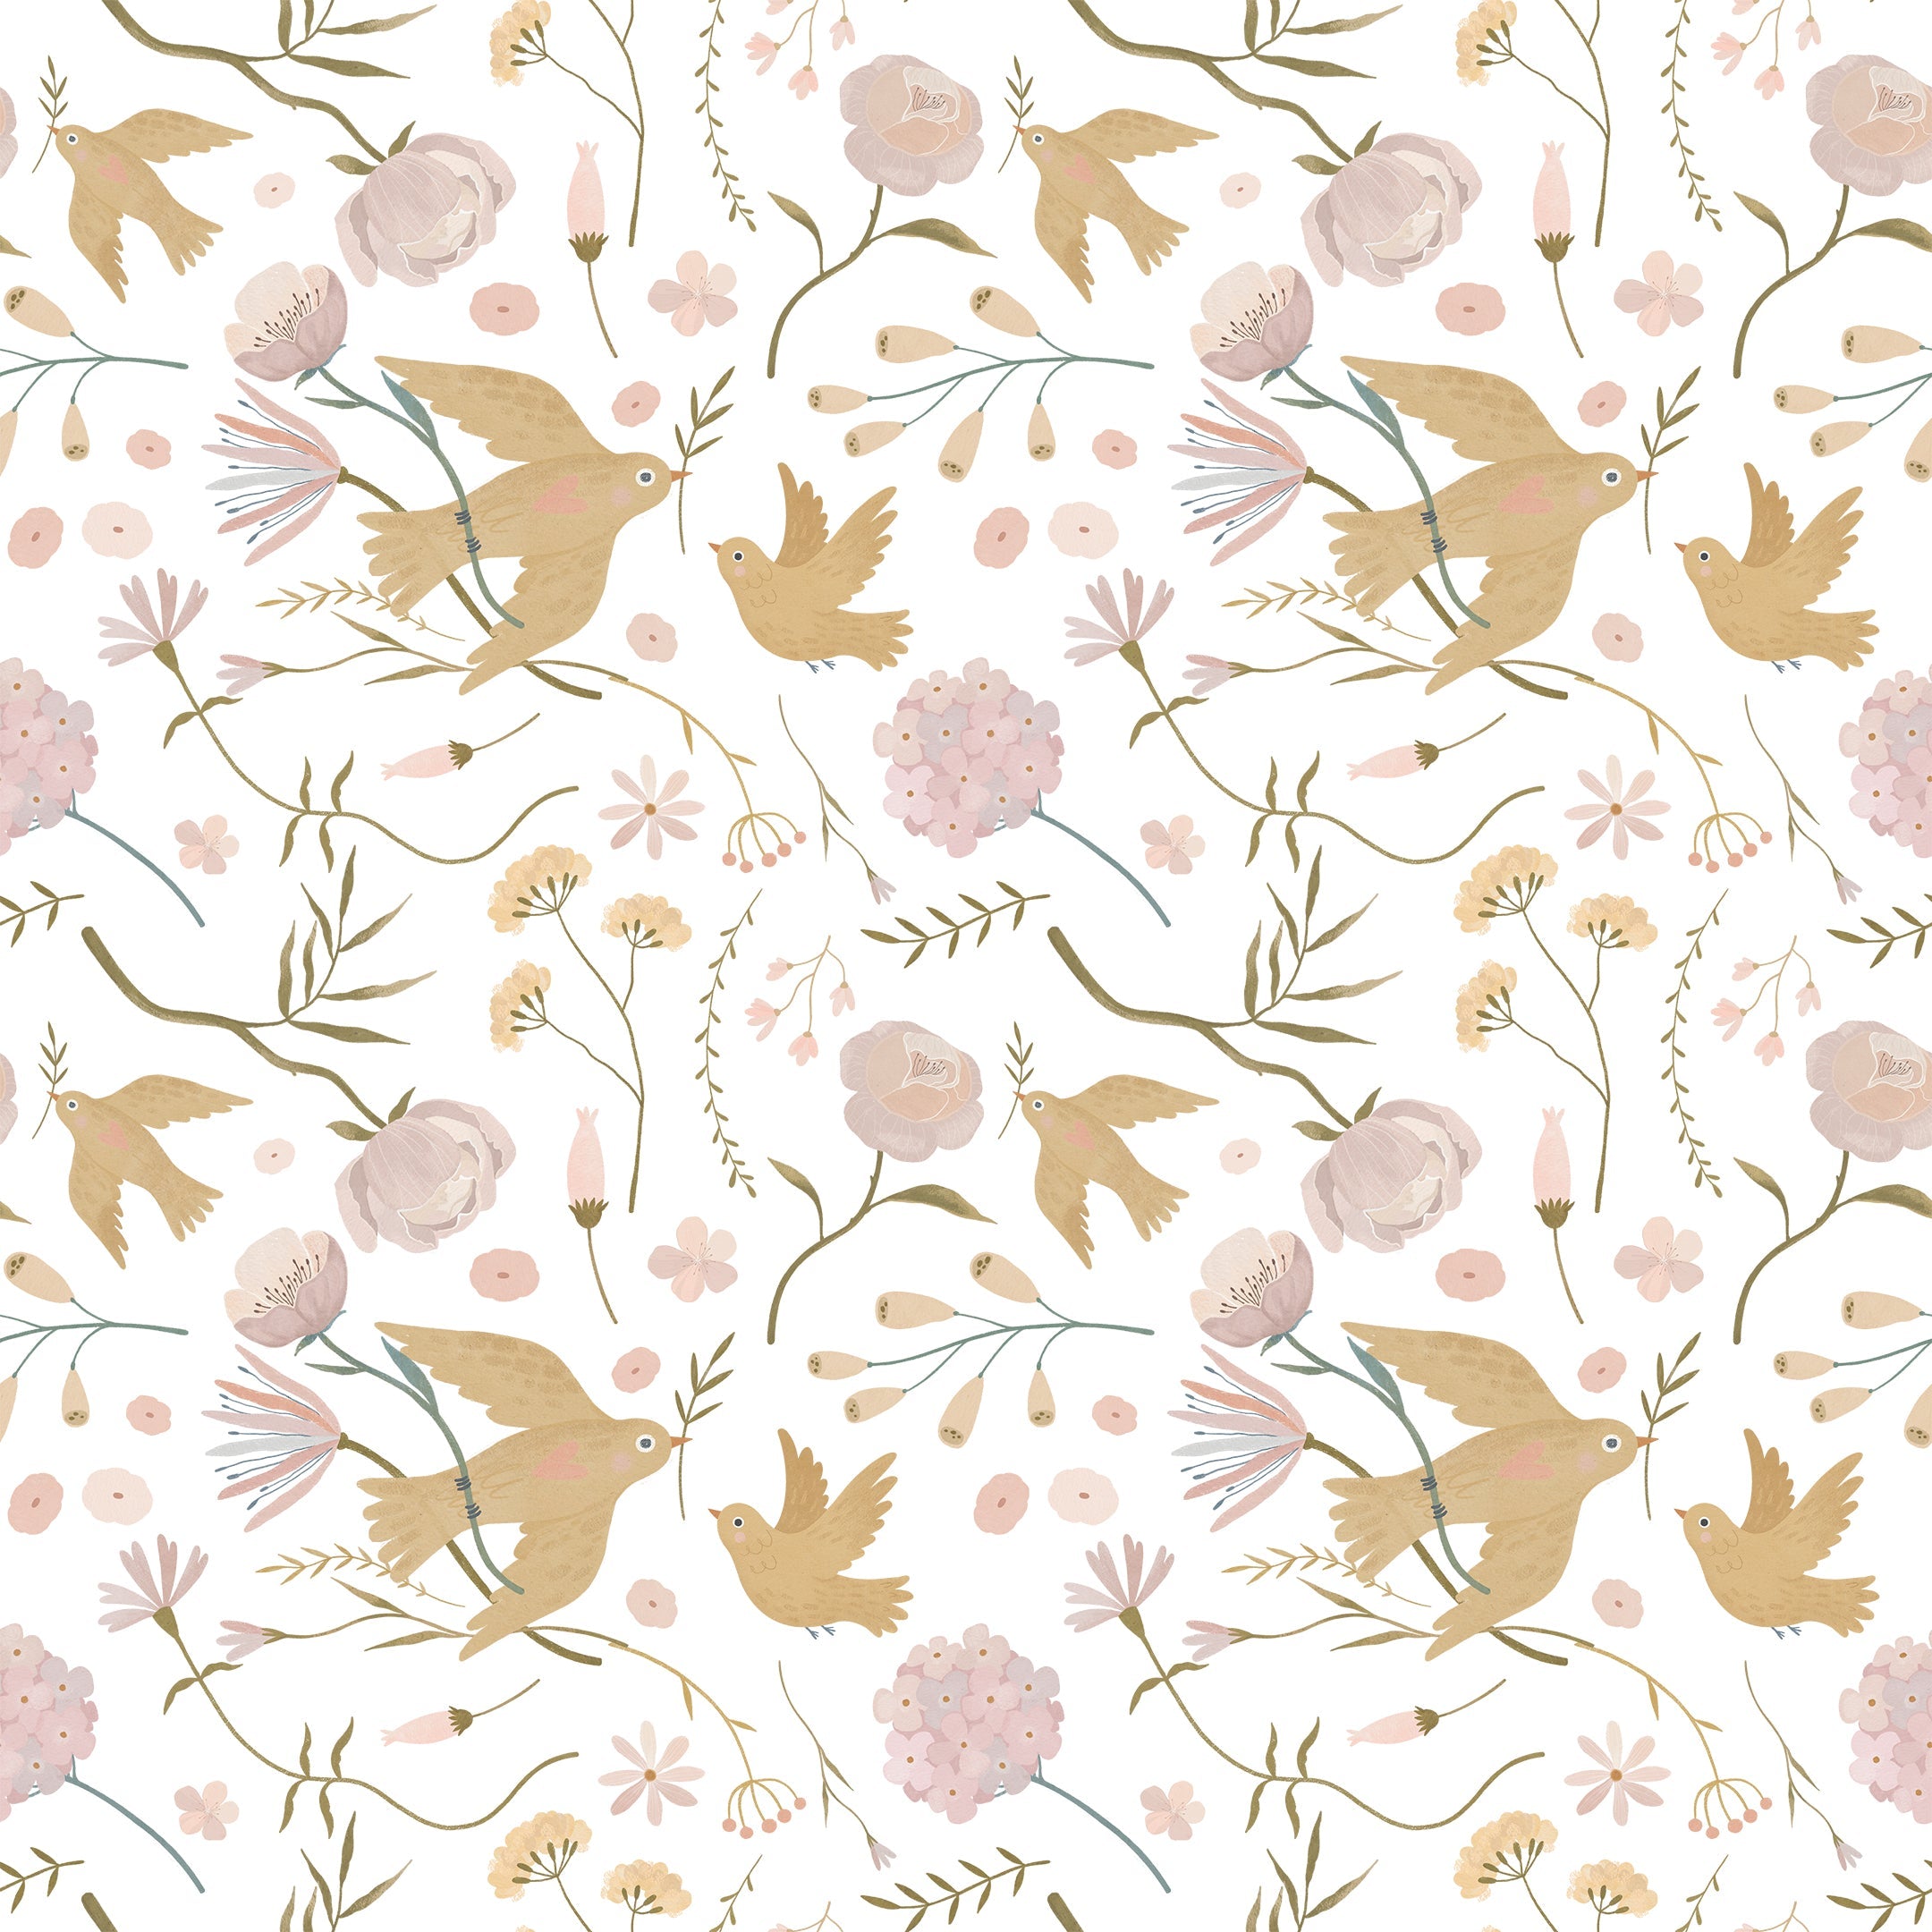 Close-up view of Pastel Garden Wallpaper II - 25 inch, featuring delicate hand-drawn birds and blooming flowers in soft pastel hues of pink, beige, and green on a white background.